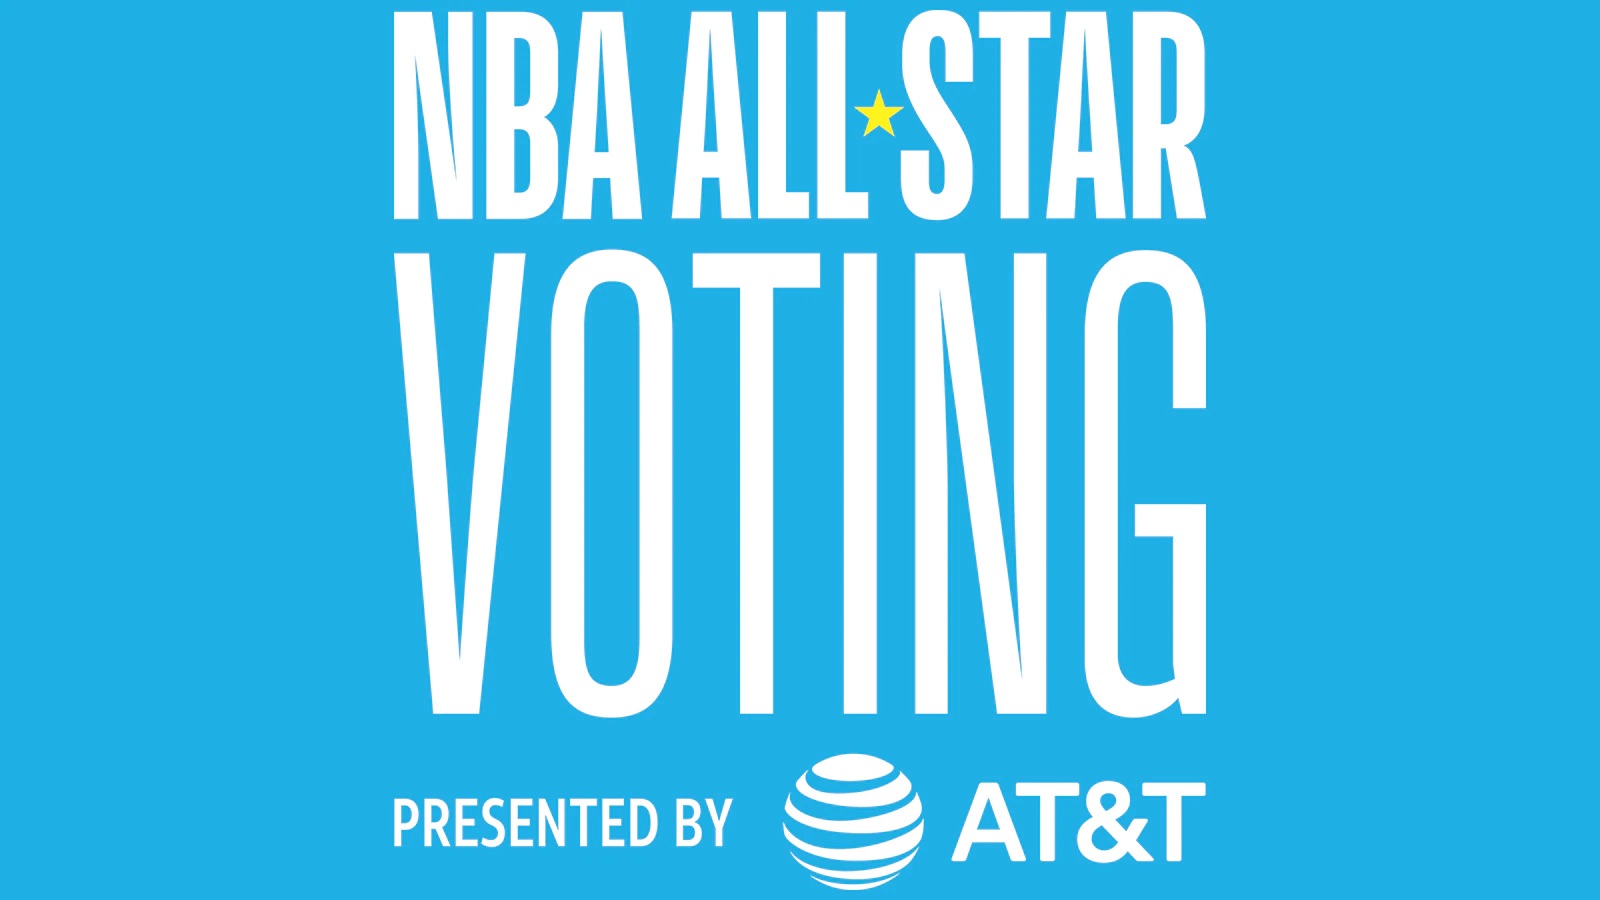 NBA All-Star voting presented by AT&T tips off Dec. 20 | NBA.com ...